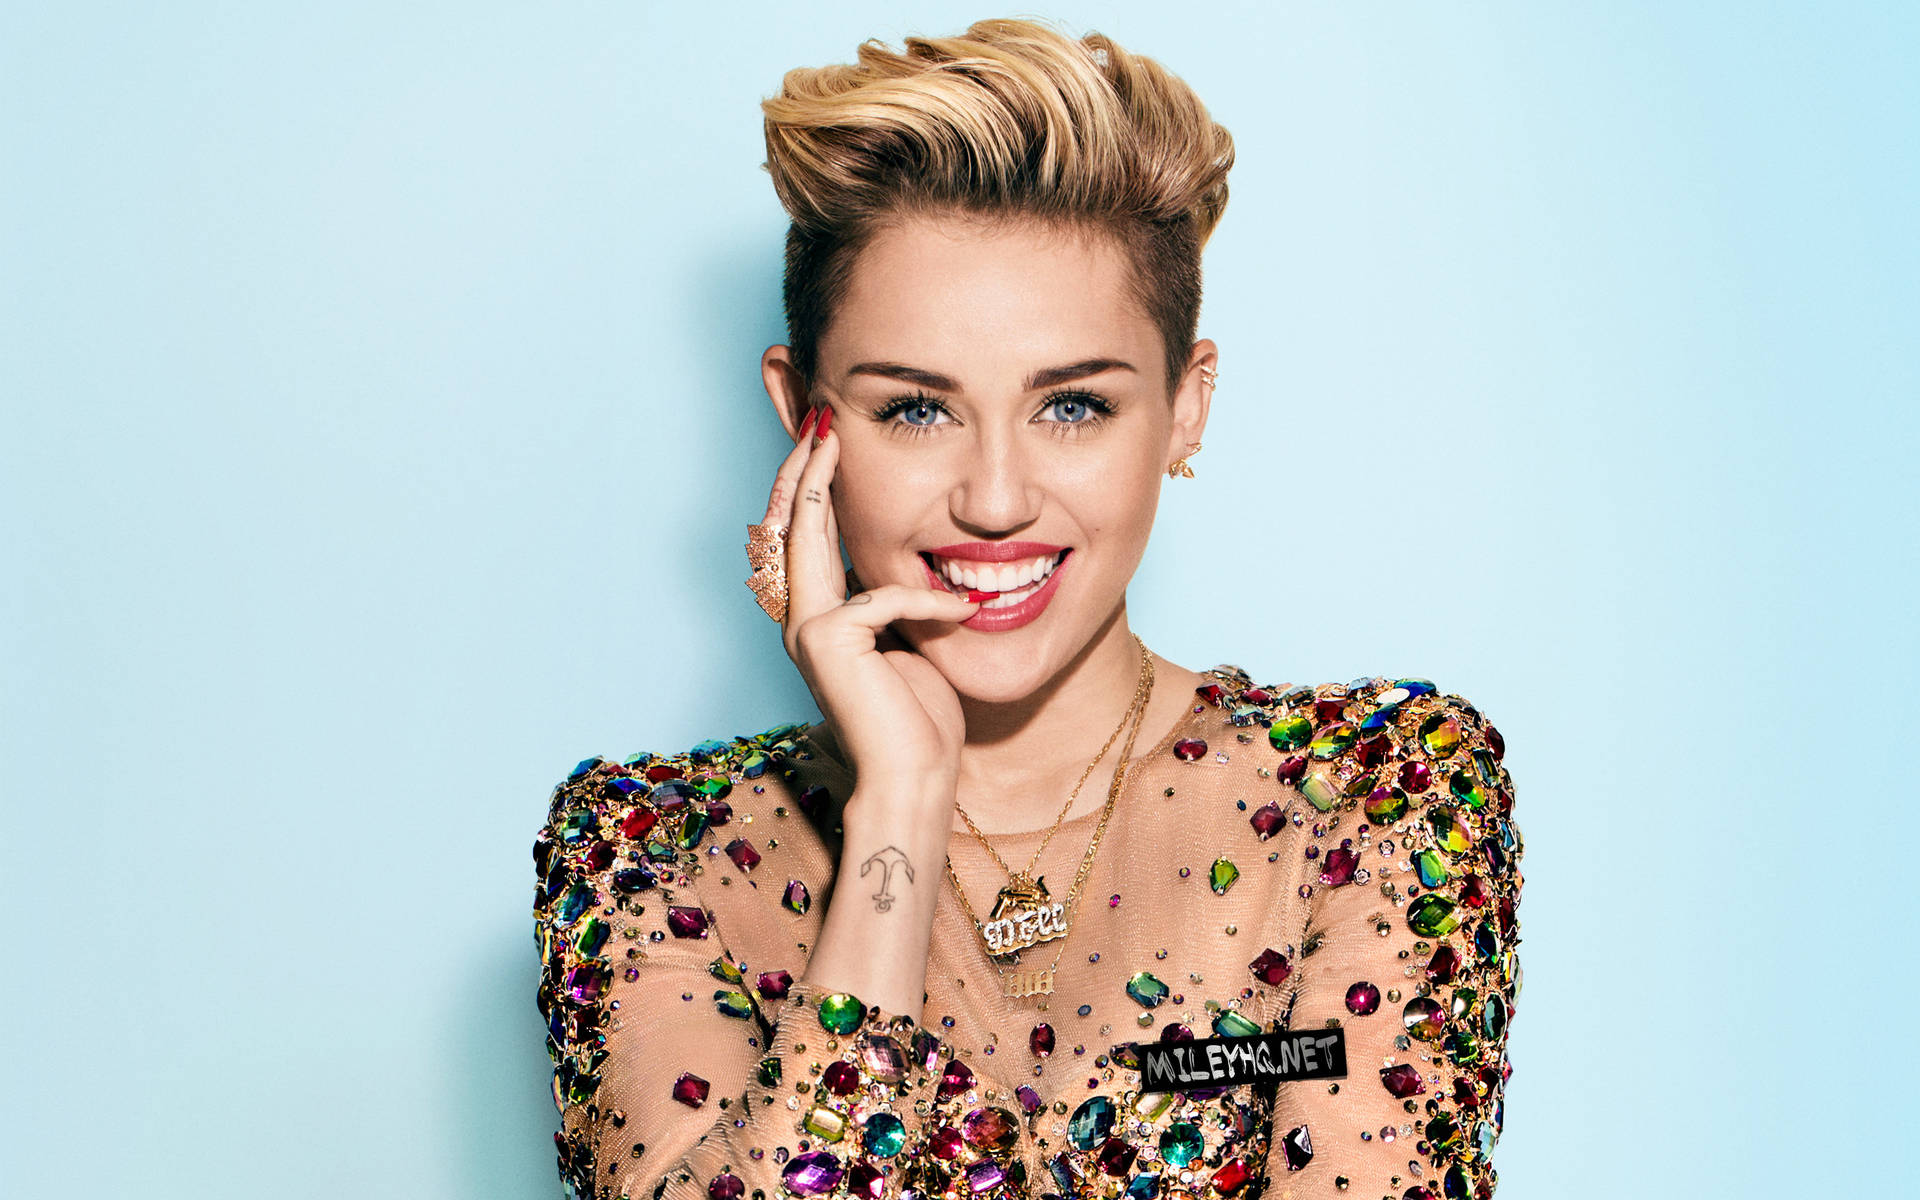 Miley Cyrus In Gem Stone Outfit Wallpaper